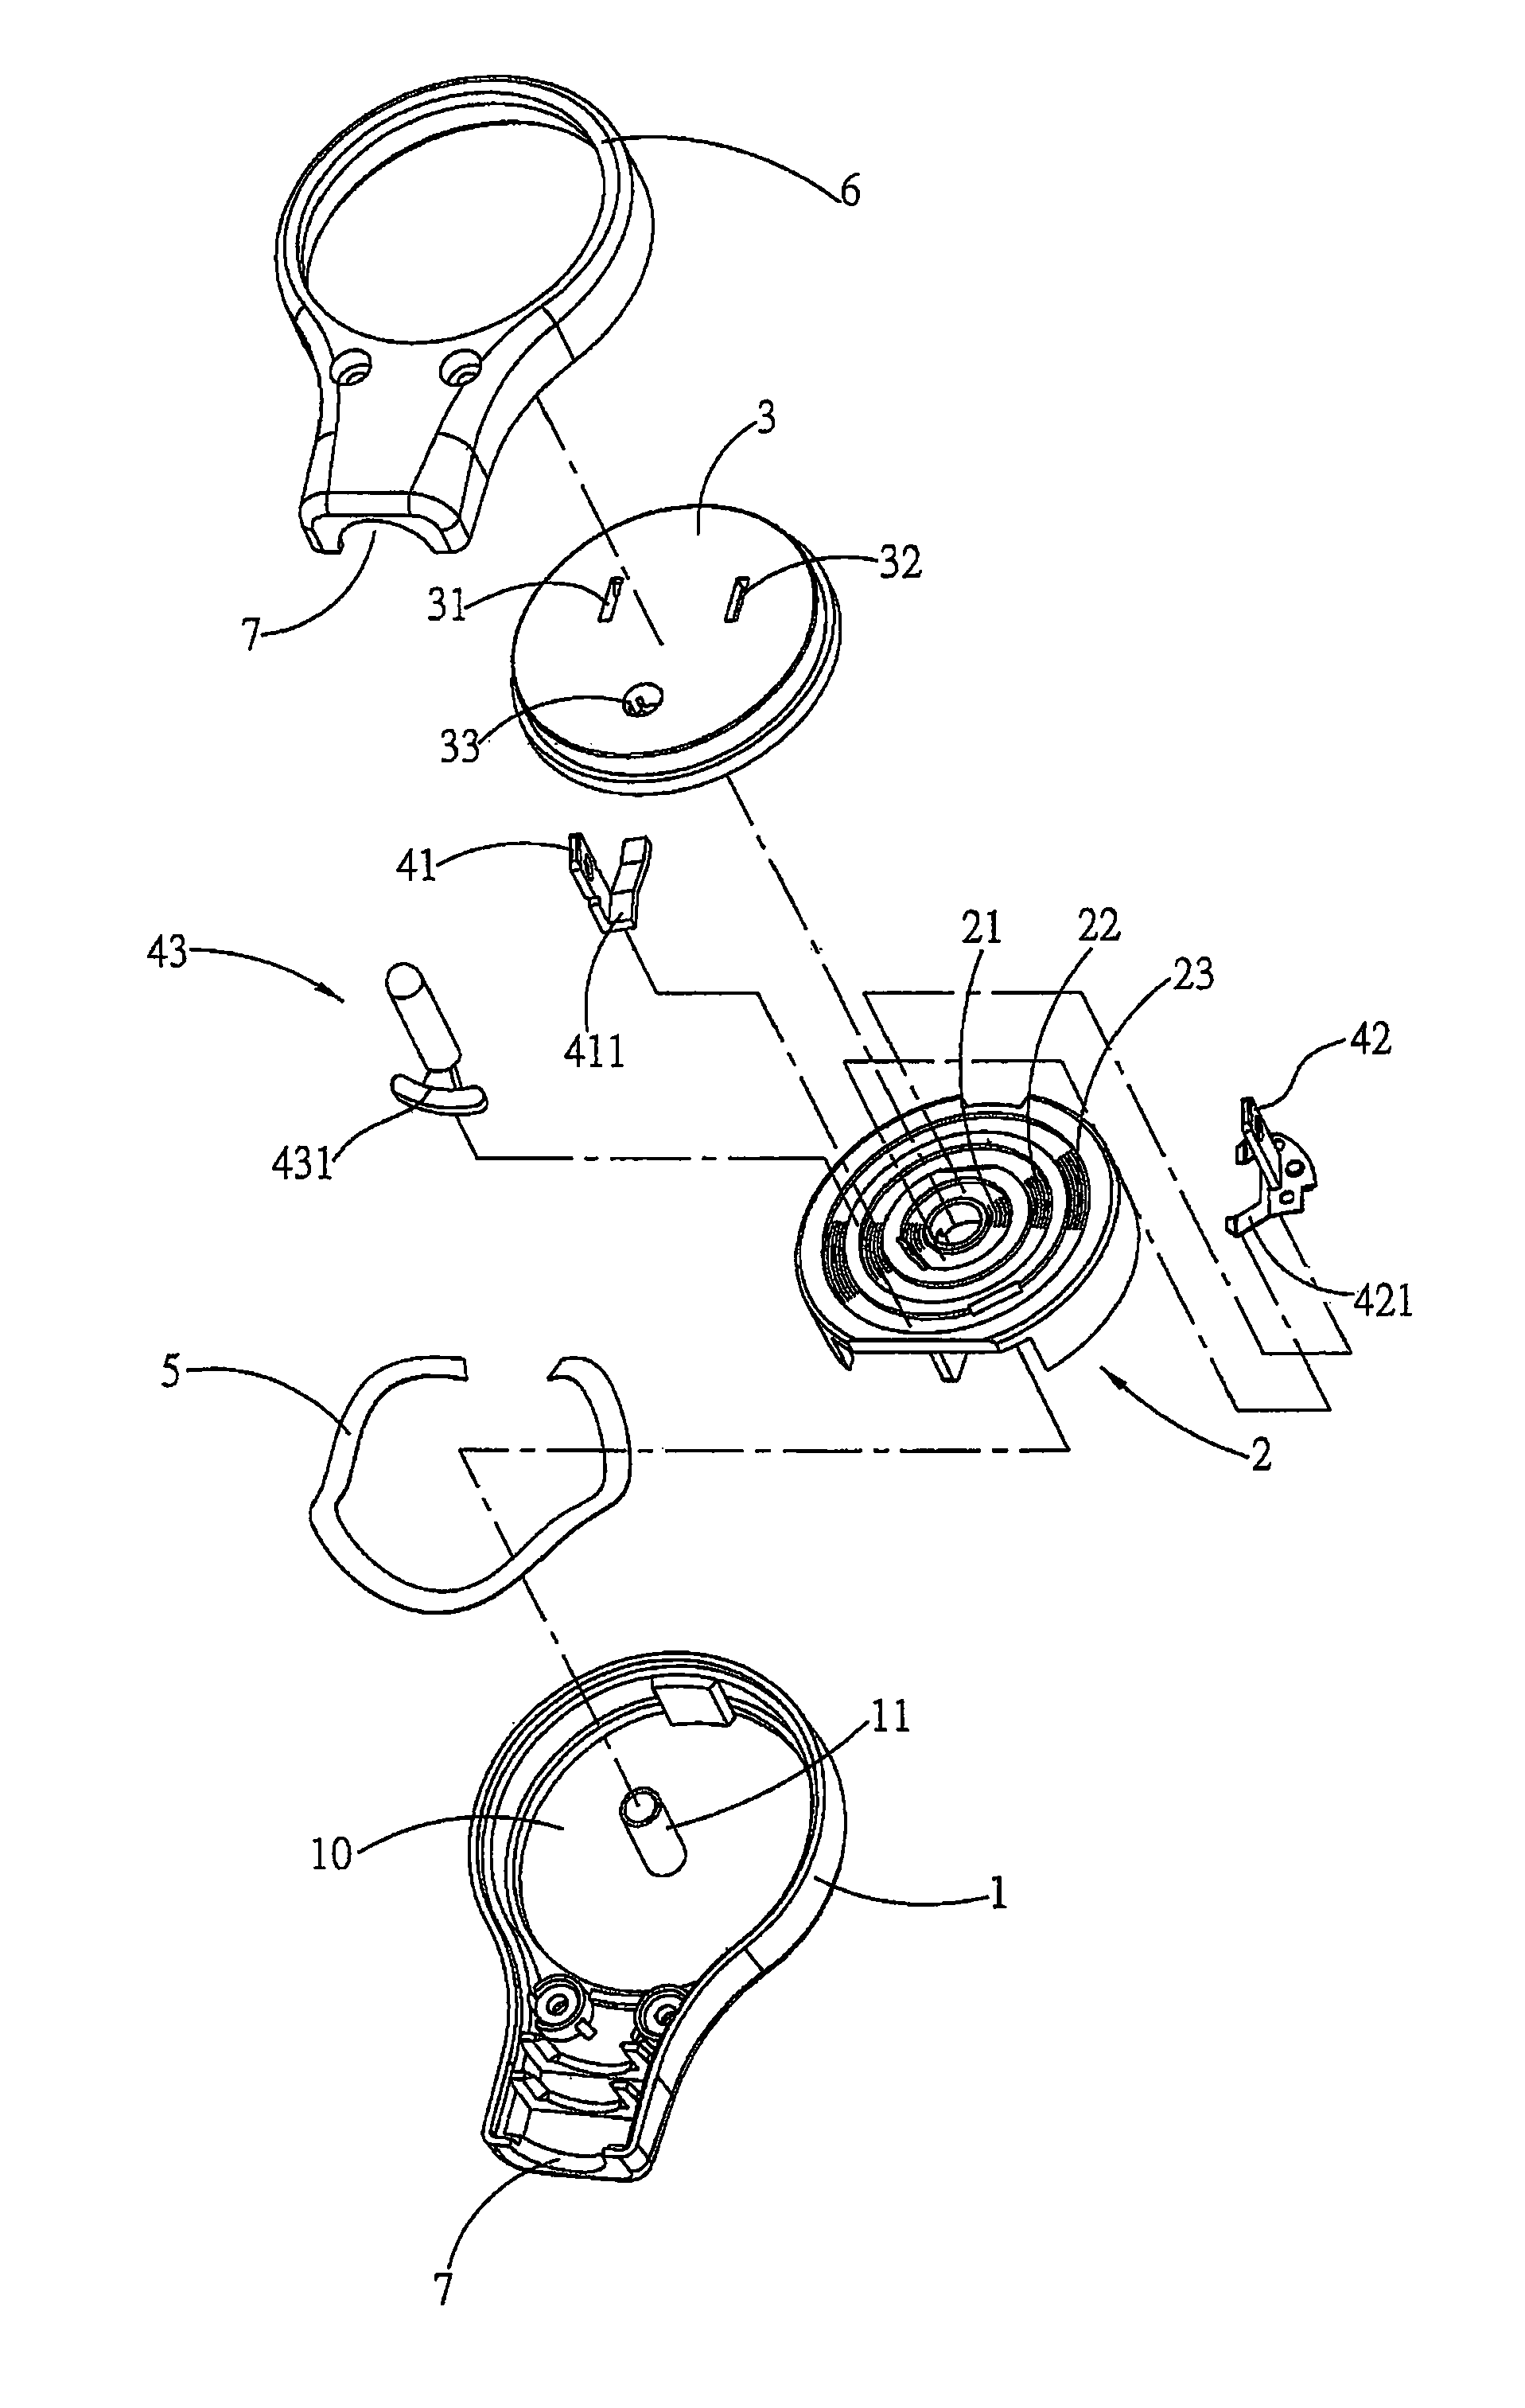 Power plug with a freely rotatable delivery point